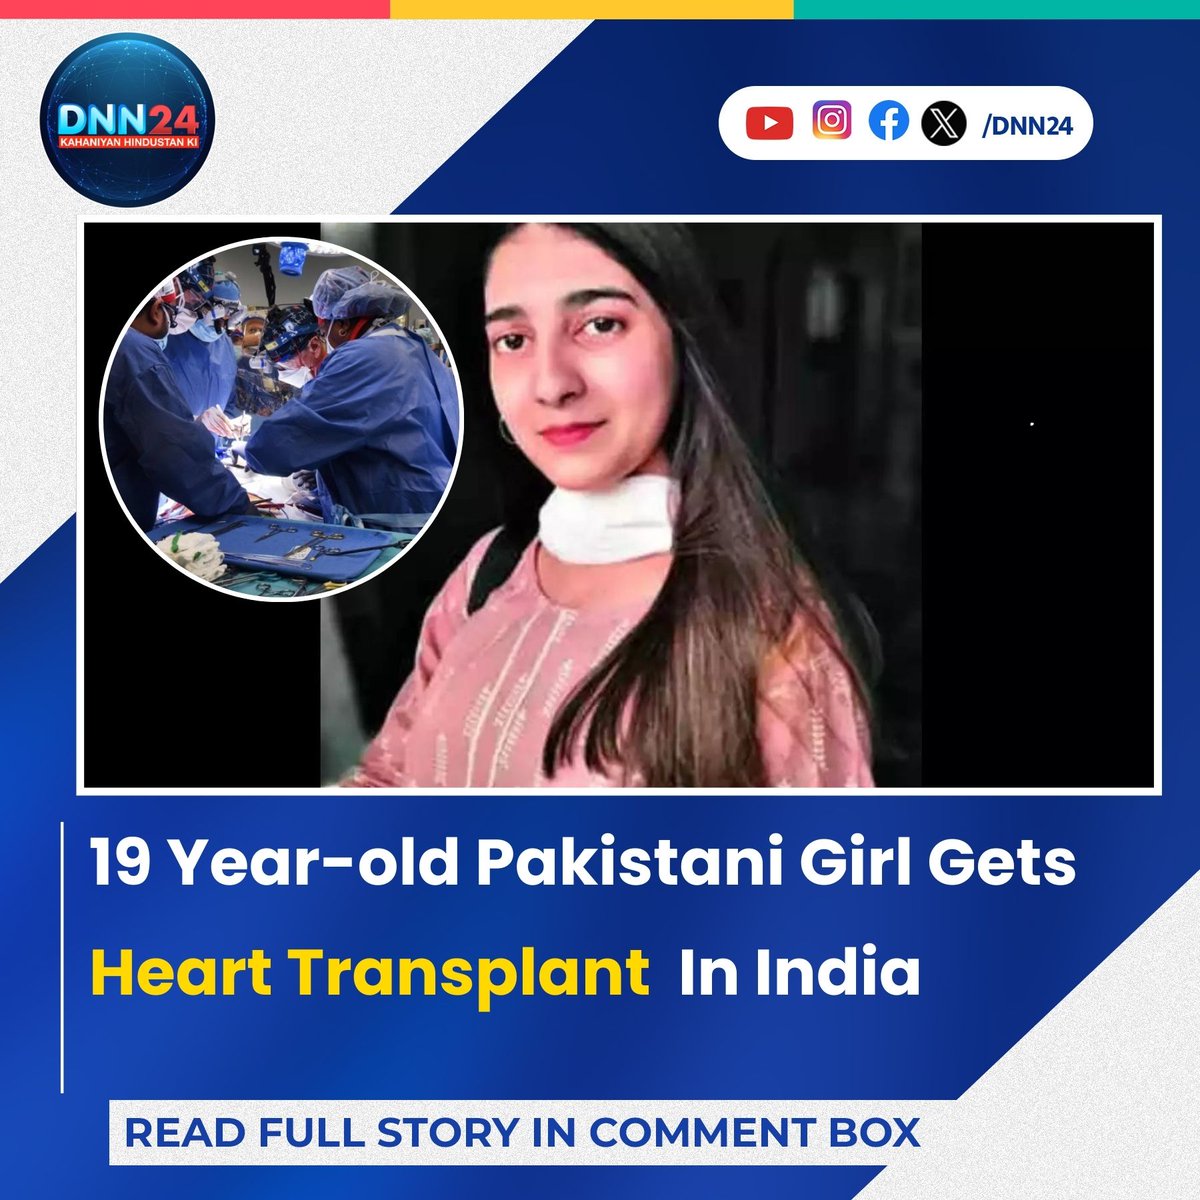 In a remarkable display of humanity, Indian doctors extend a lifeline to Ayesha Rashan, a 19-year-old girl from Karachi, who receives a new lease on life with a heart transplant in India

#AyeshaRashan #UnityInDiversity #SharedHumanity #GlobalHealthcare #InspiringStory